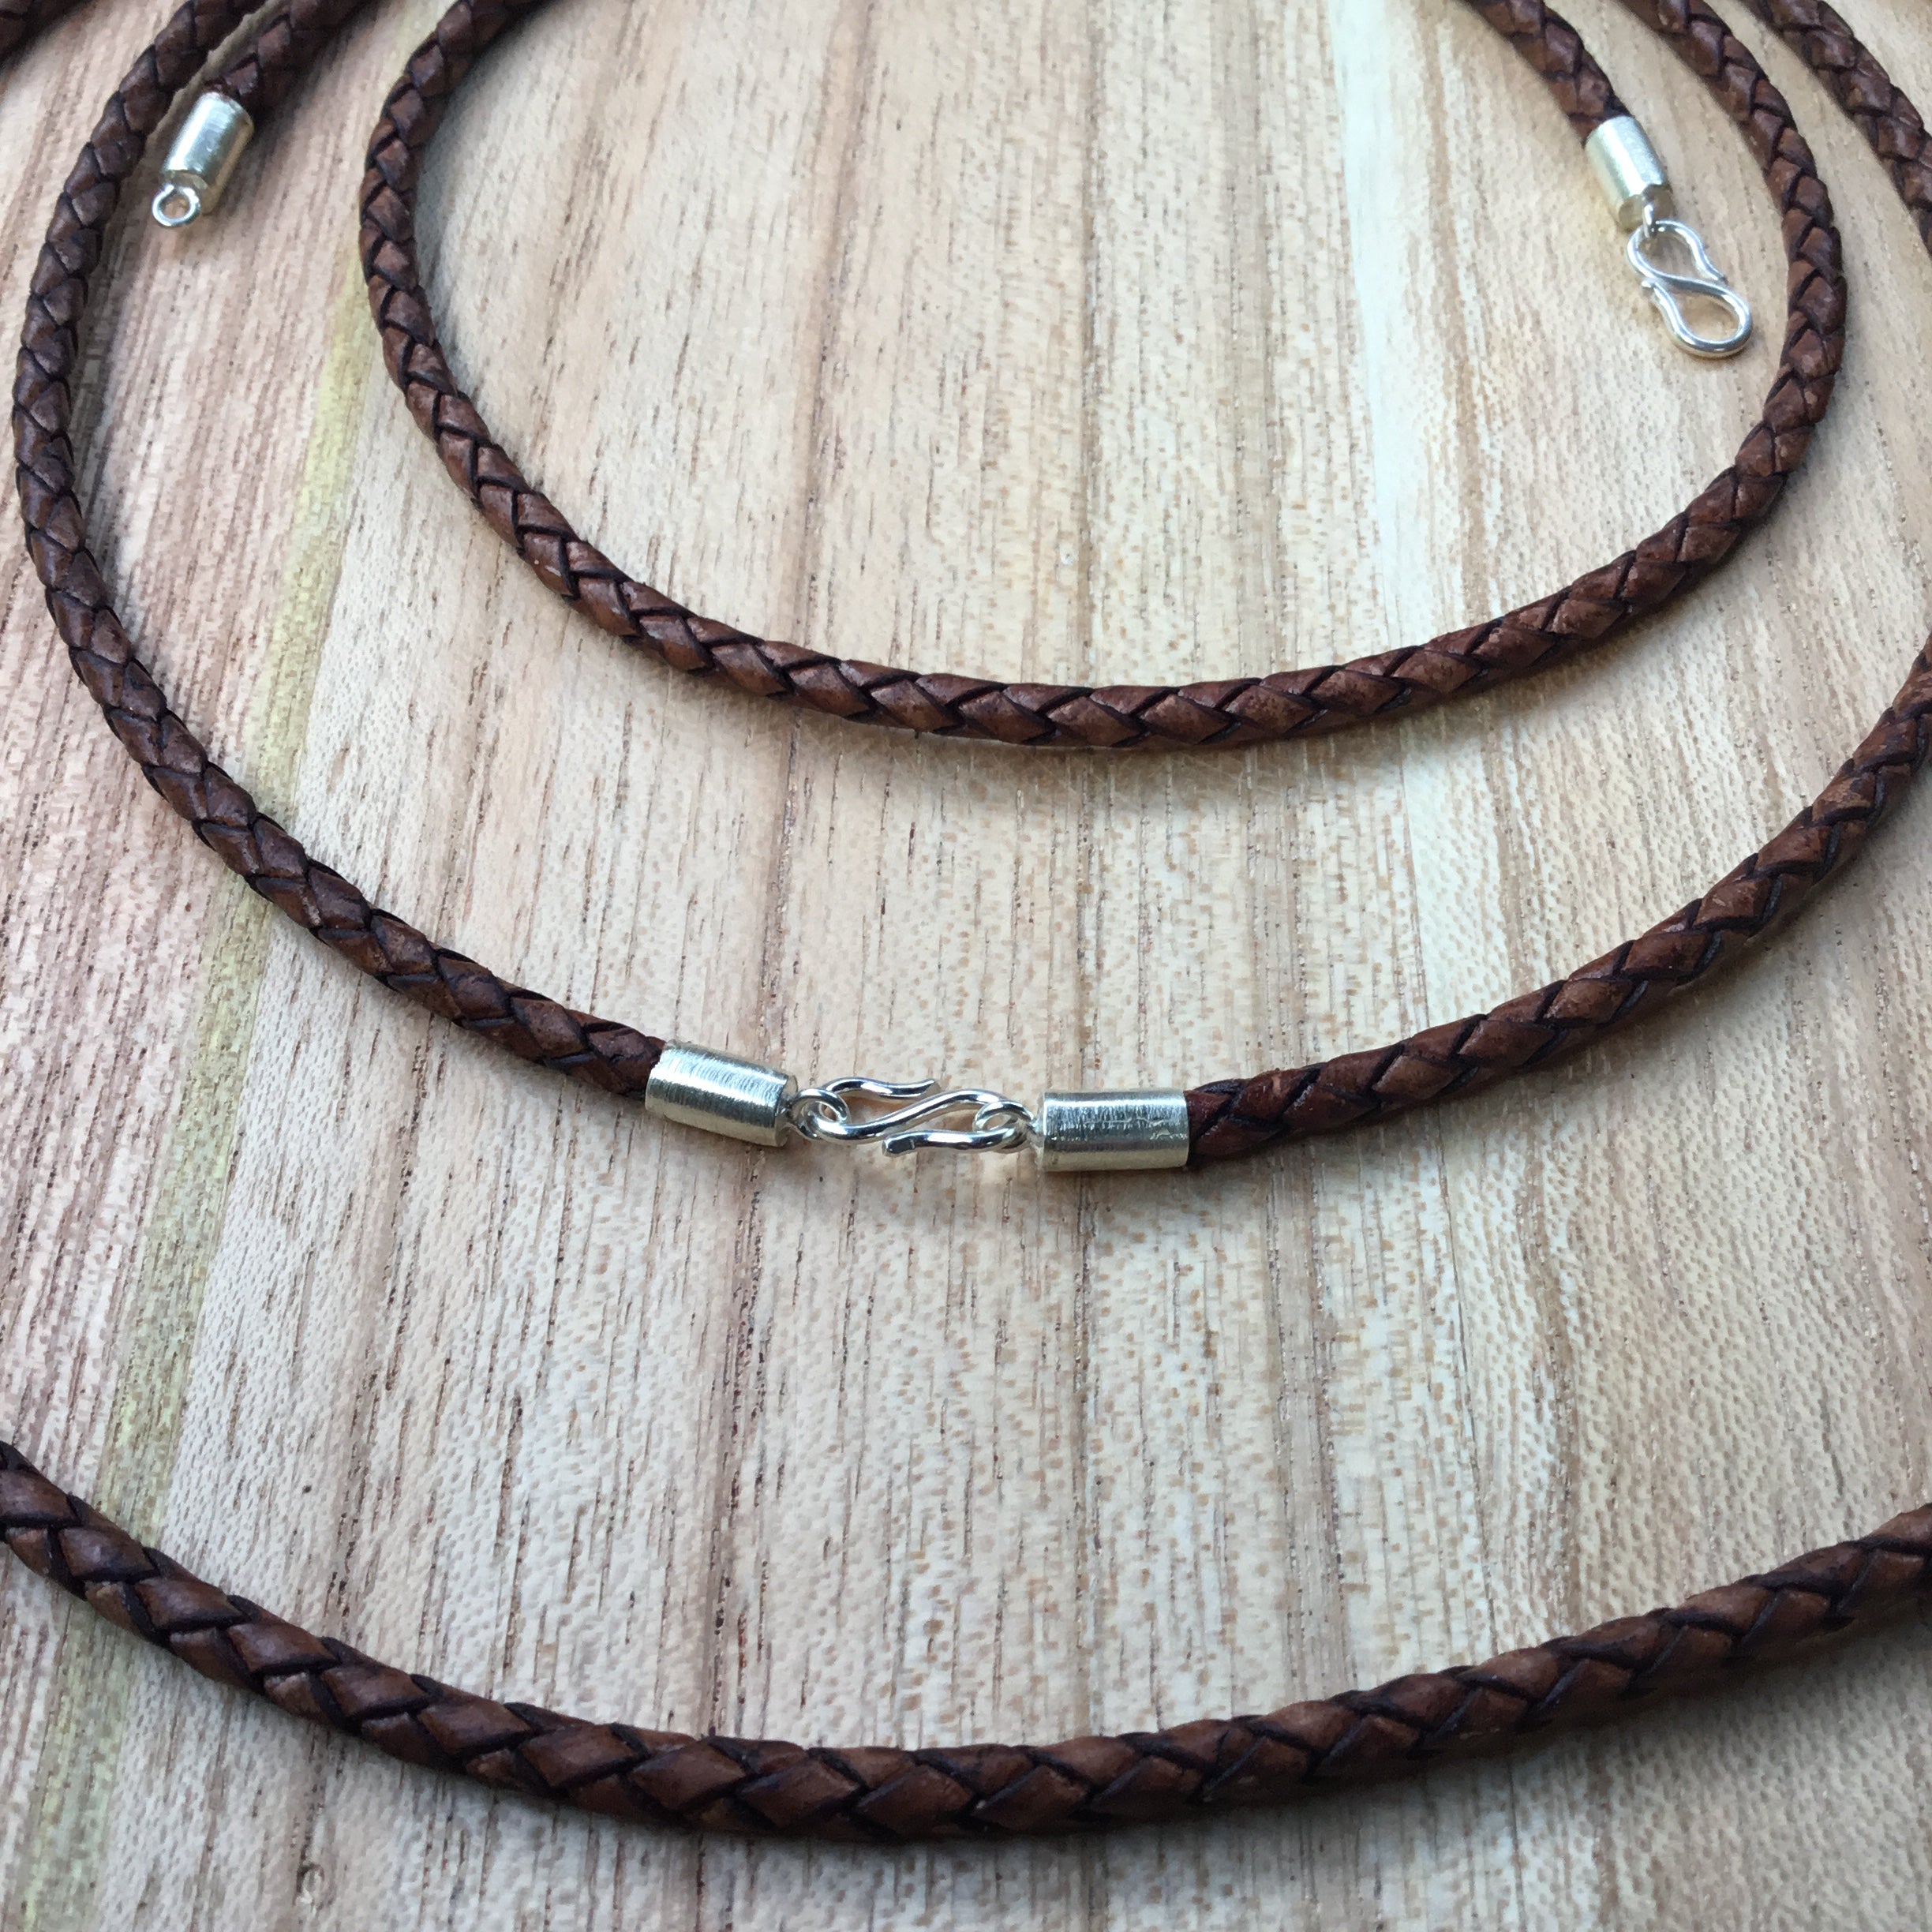 Buy Mens Leather Necklace, Men's Necklaces, Braided Leather Necklace,  Stainless Steel Magnetic Clasp, Mens Jewelry, Groomsmen Online in India -  Etsy